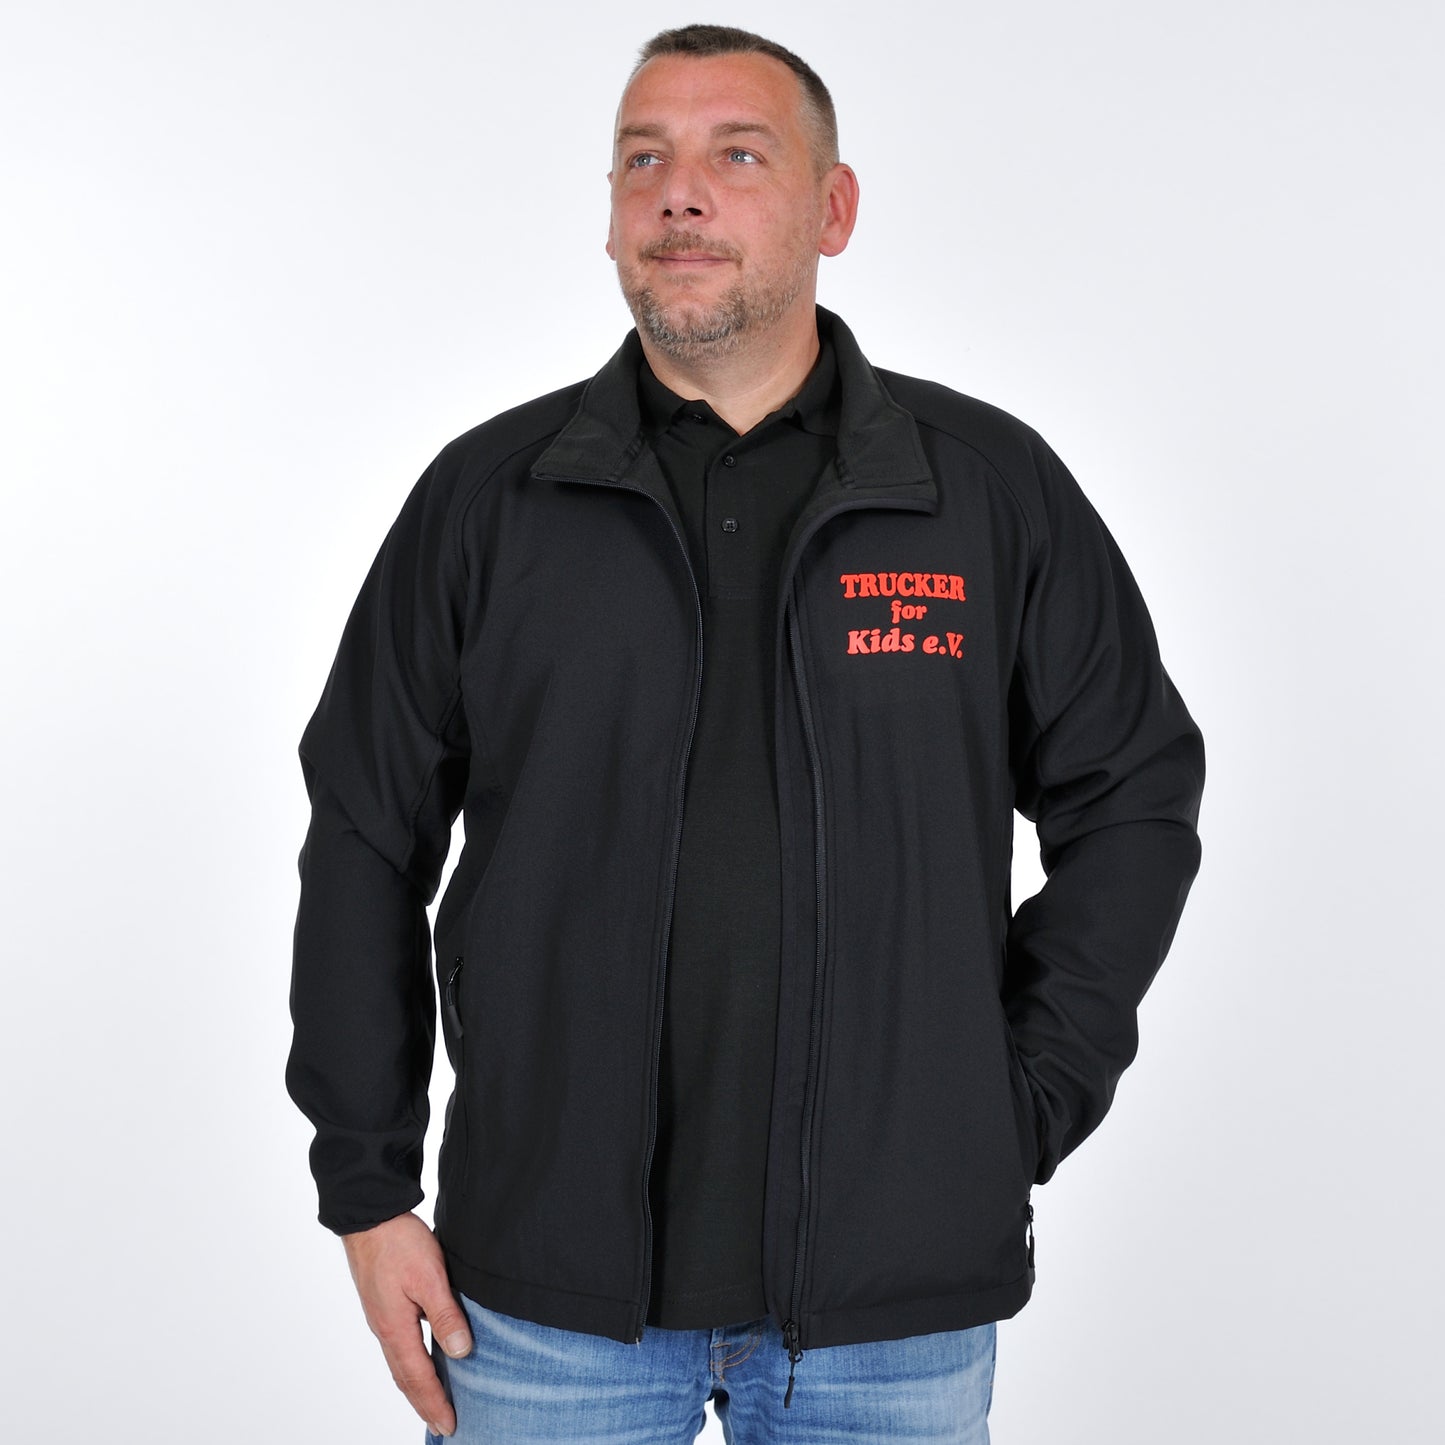 Softshell jacket for adults FROM €39.50